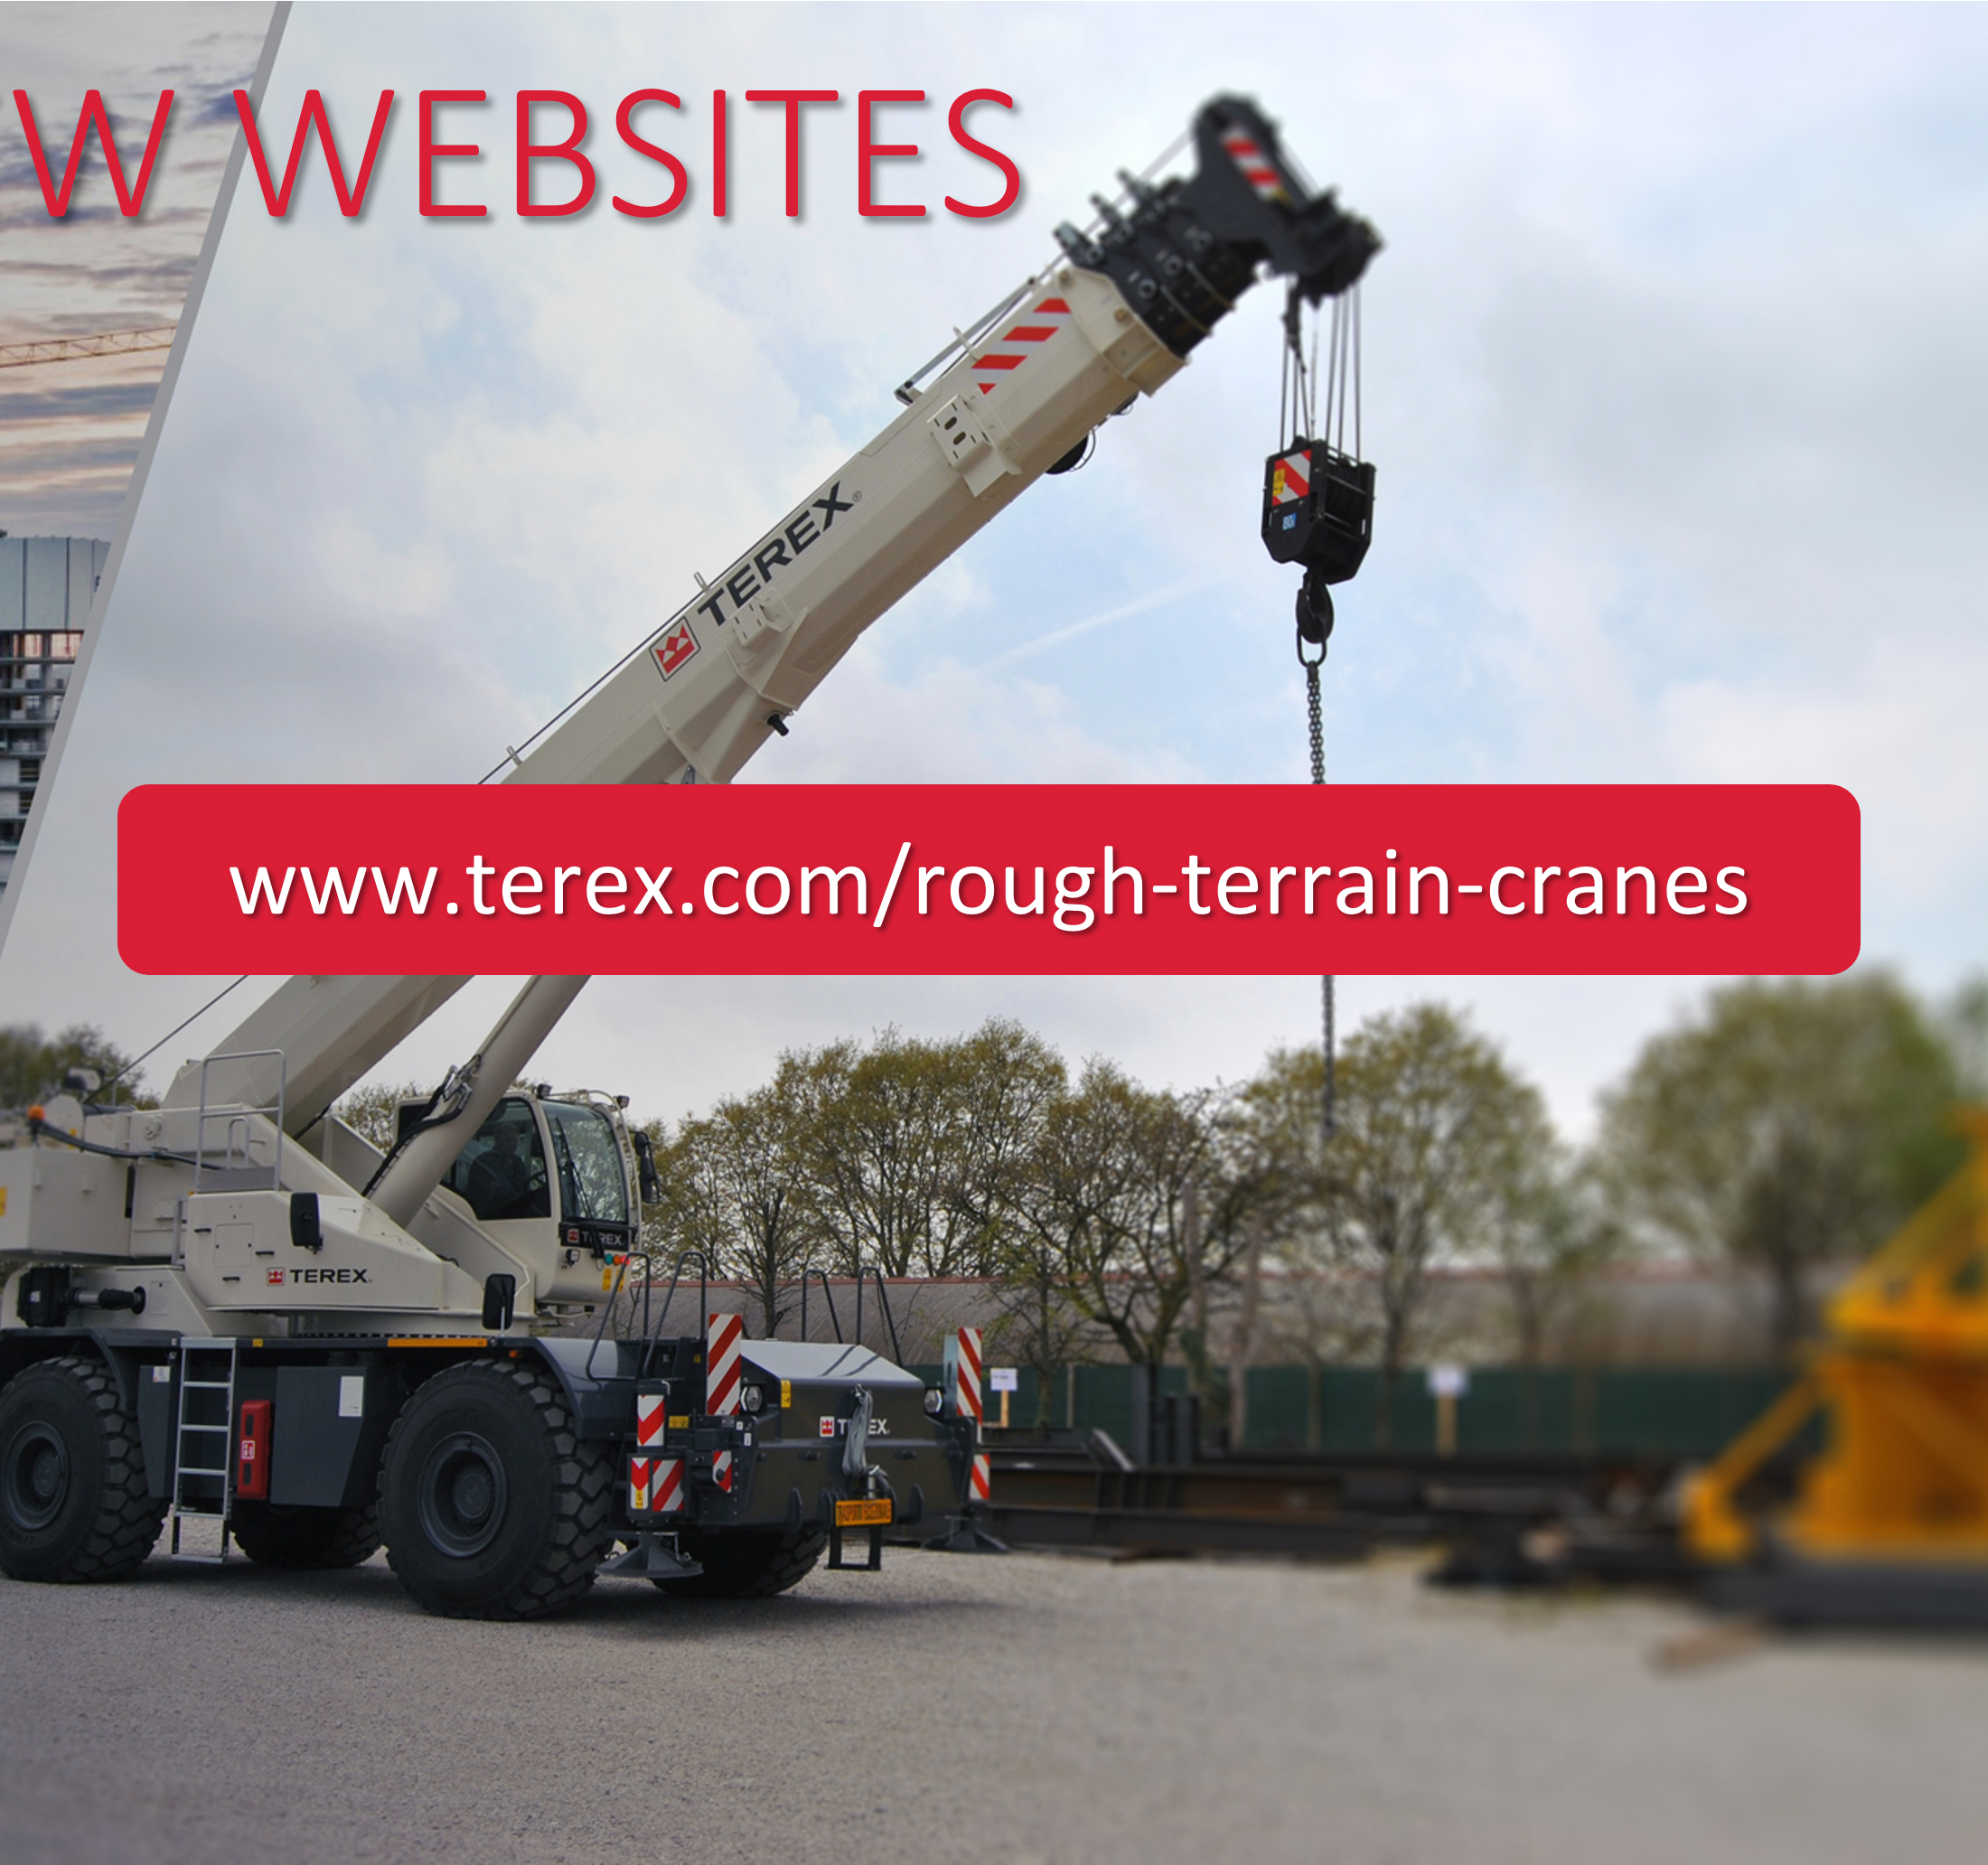 cranes homepage redirect_right